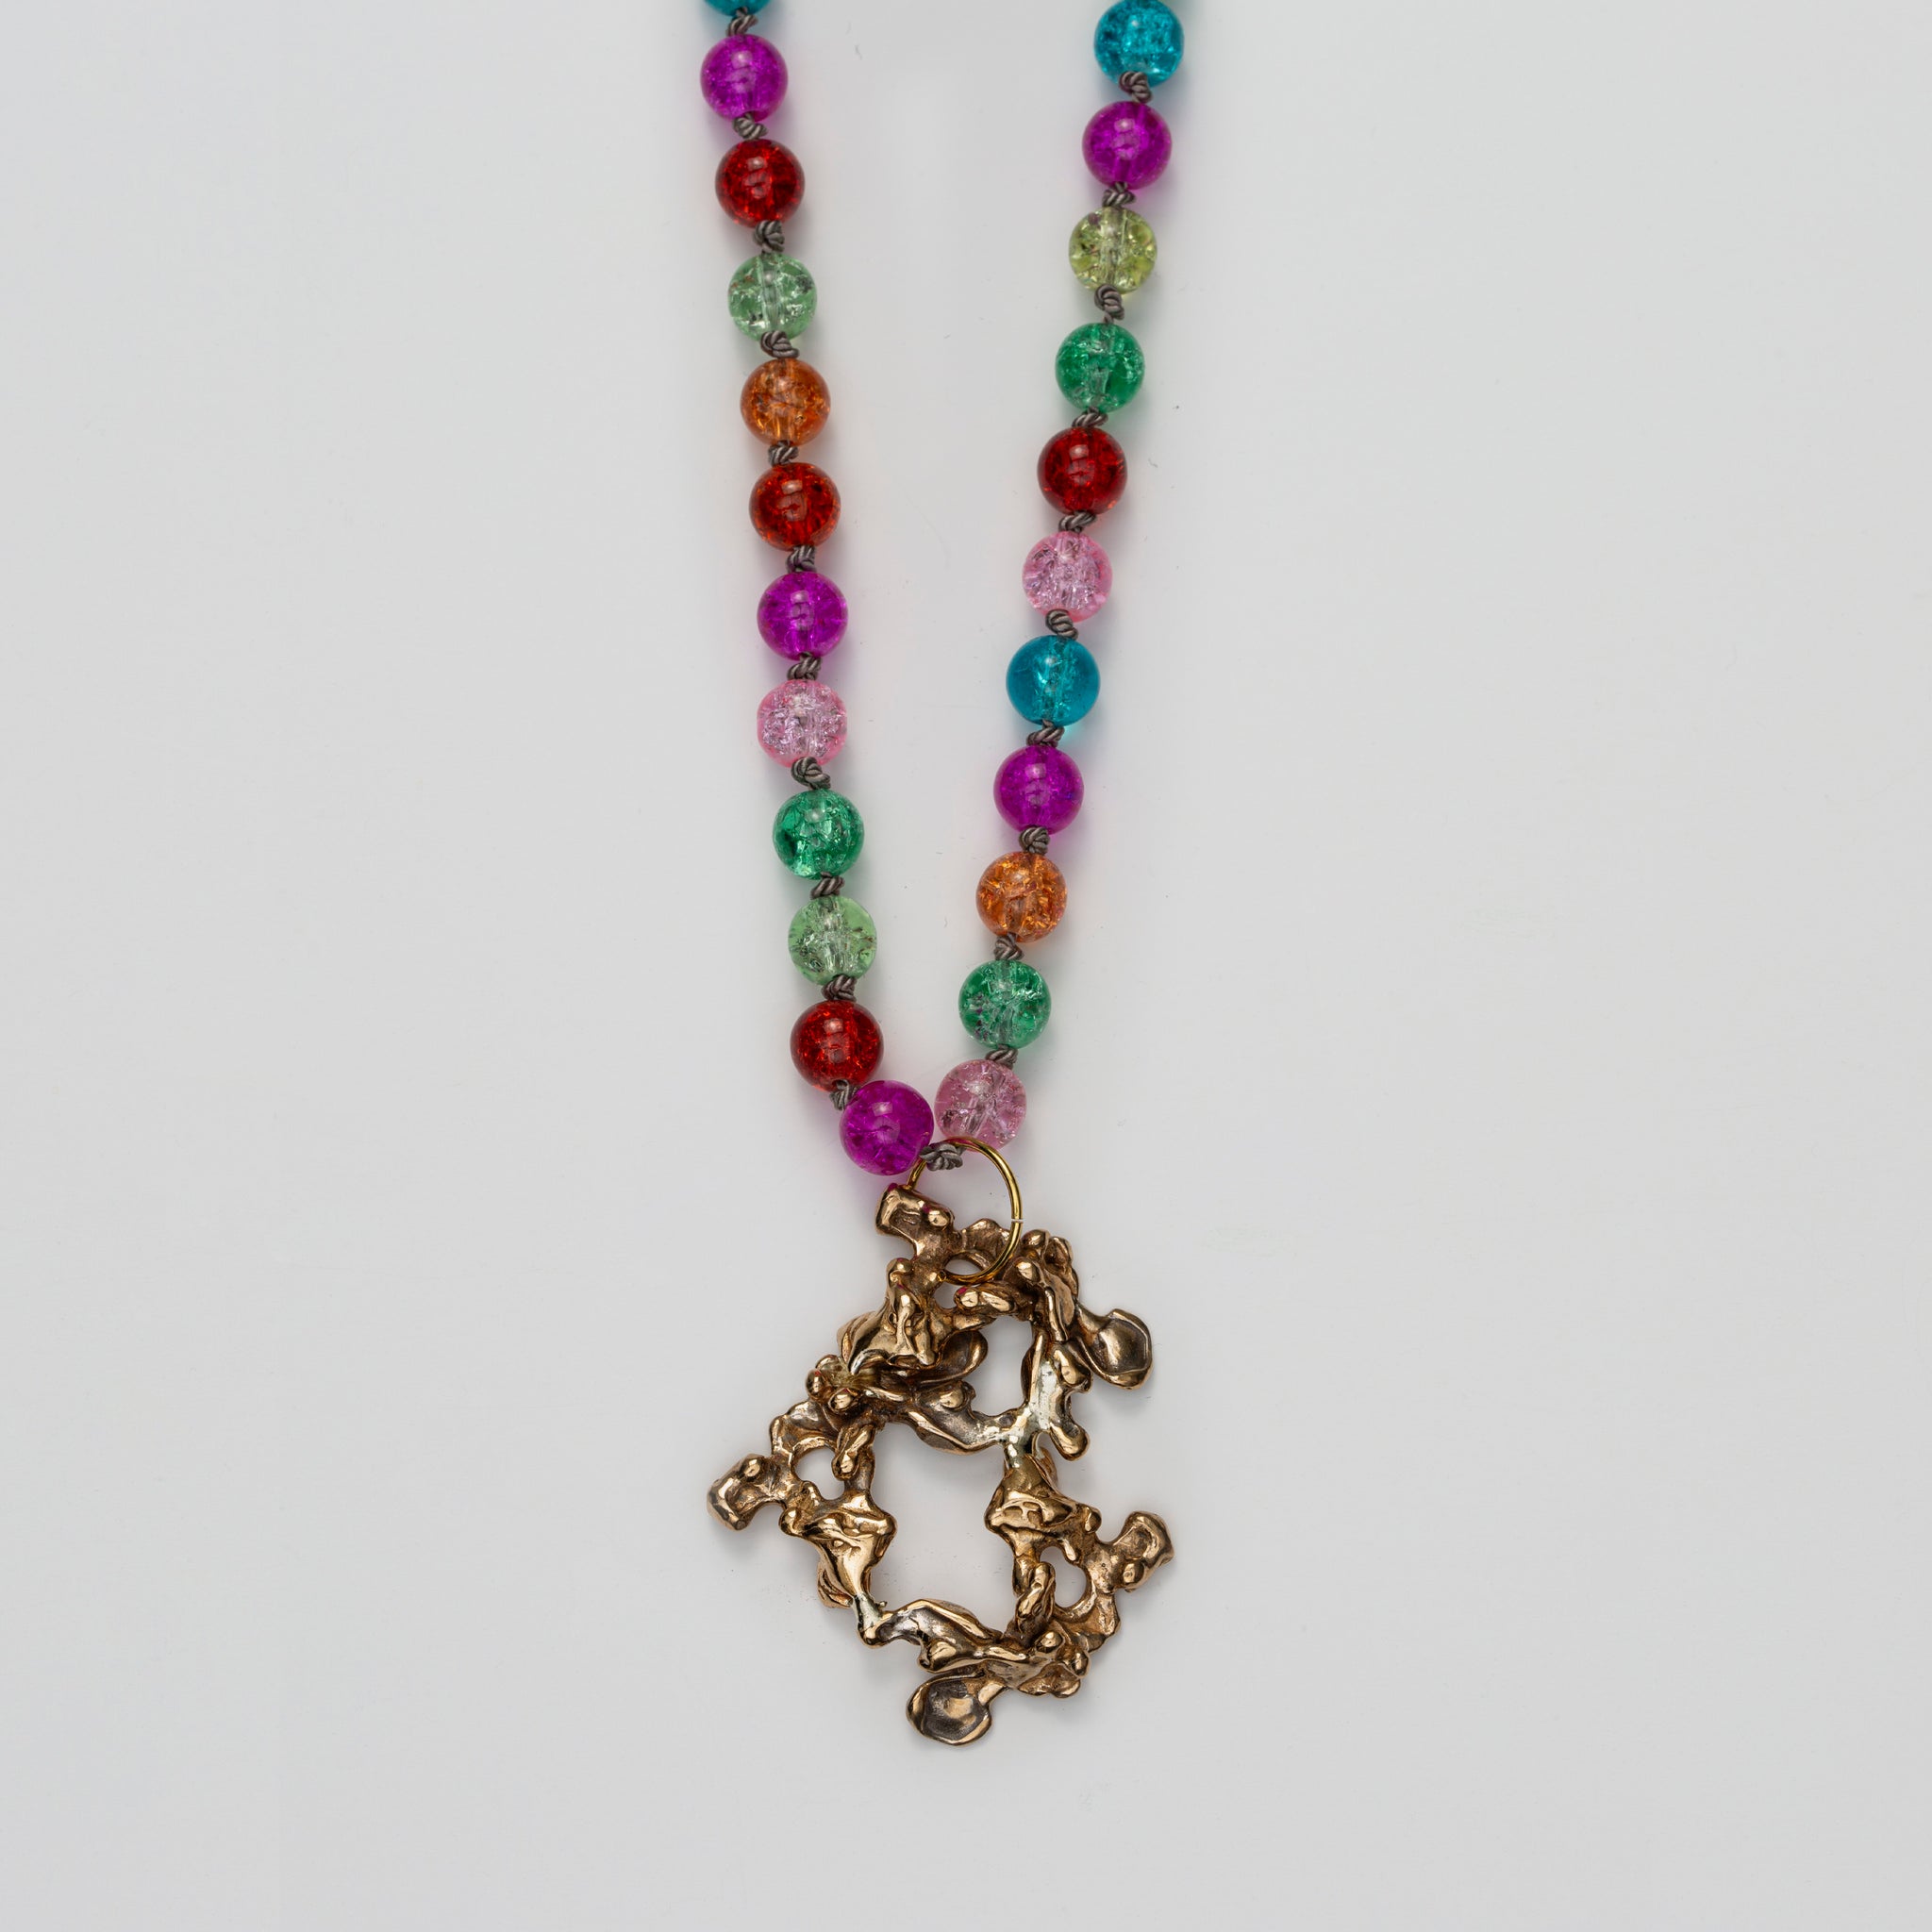 Necklace in Colored Glasspearl with Bronze Pendant